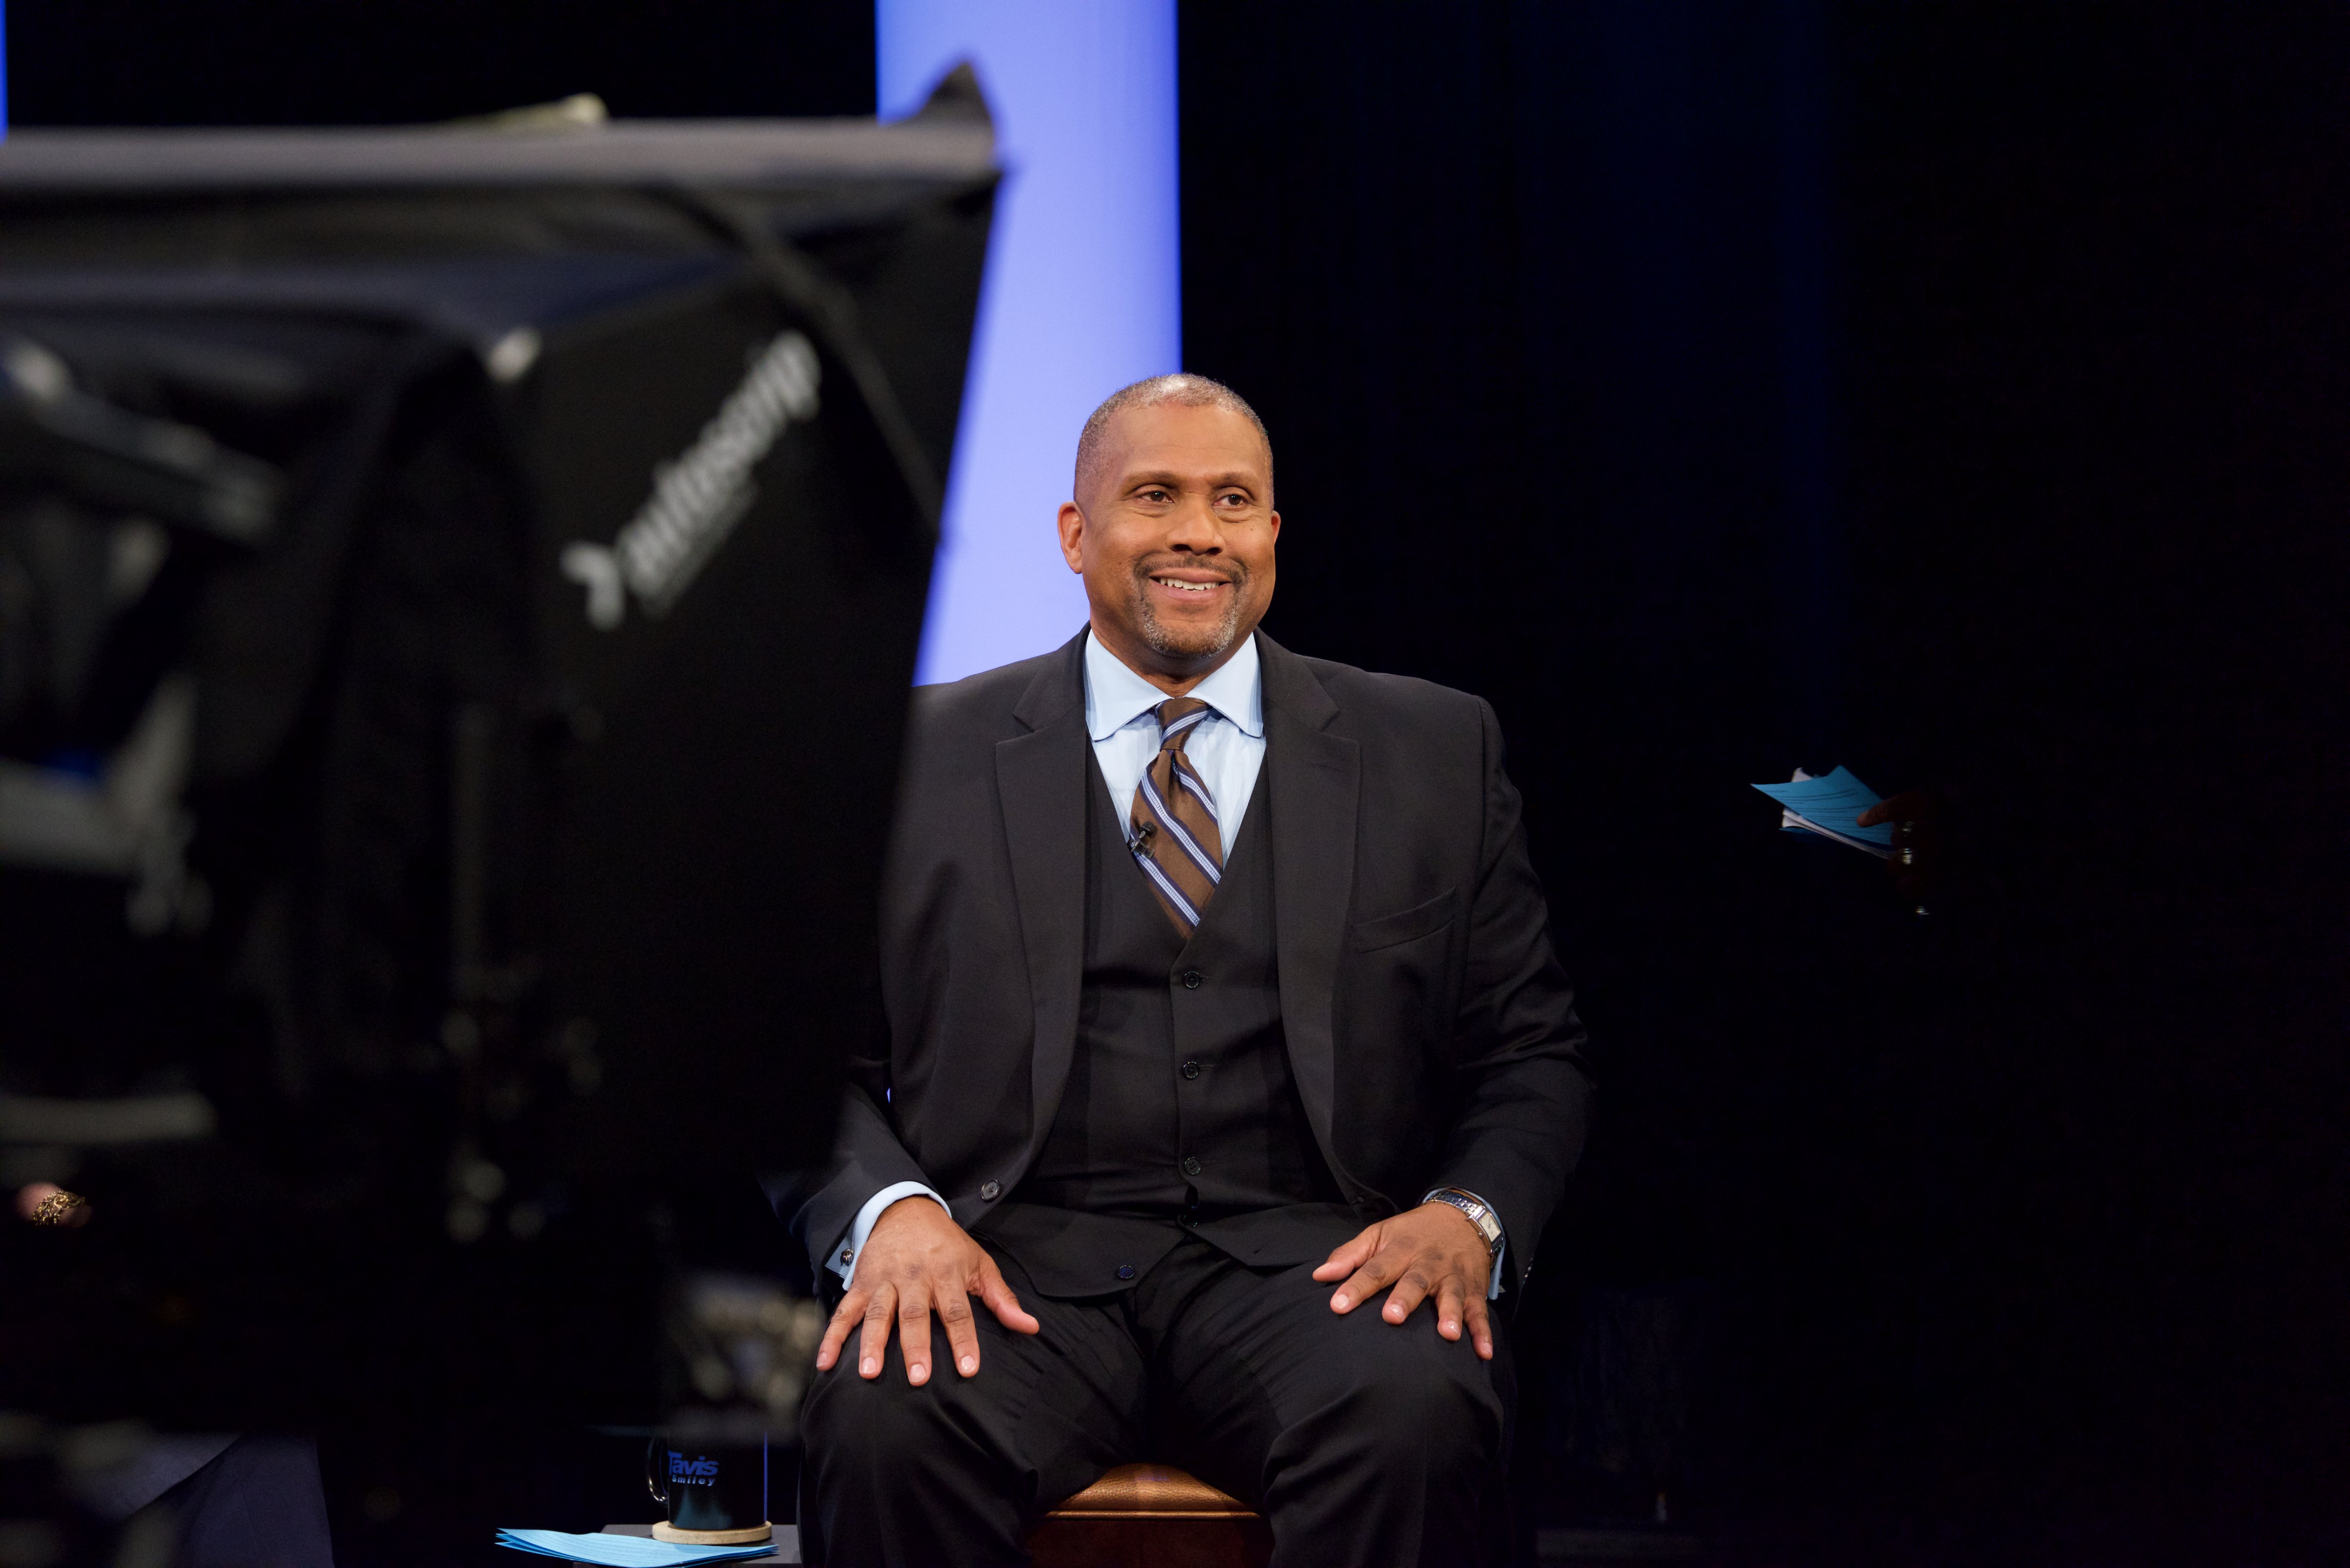 Broadcaster/Producer Tavis Smiley serves as host and moderator on Courting Justice With Tavis Smiley on December 8, 2016 in Cleveland, Ohio. (Earl Gibson III—Getty Images)